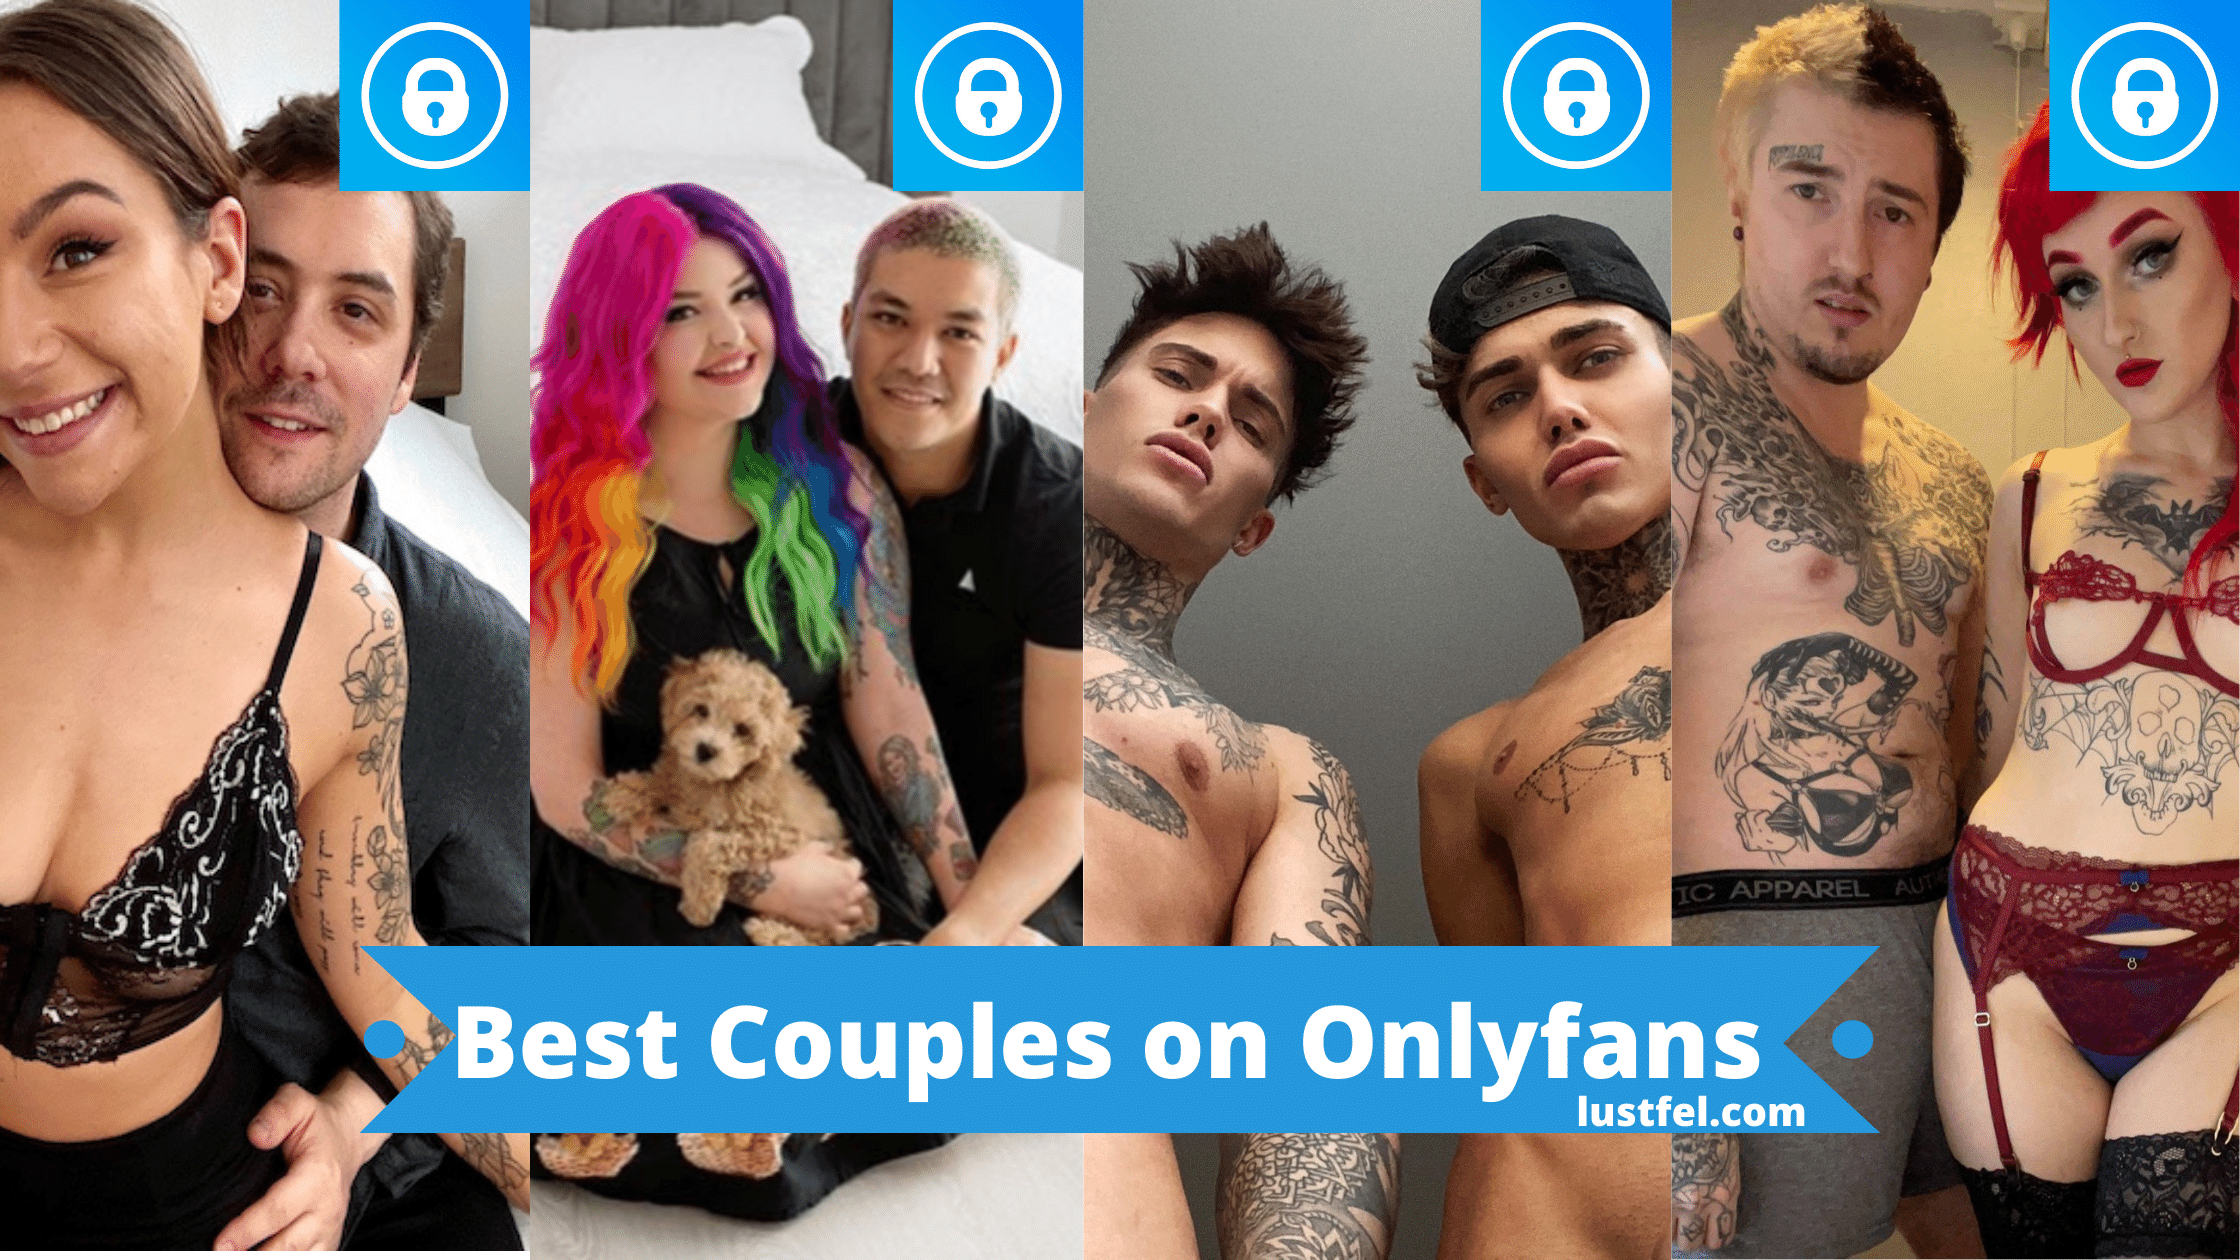 Couple onlyfans gay the couple